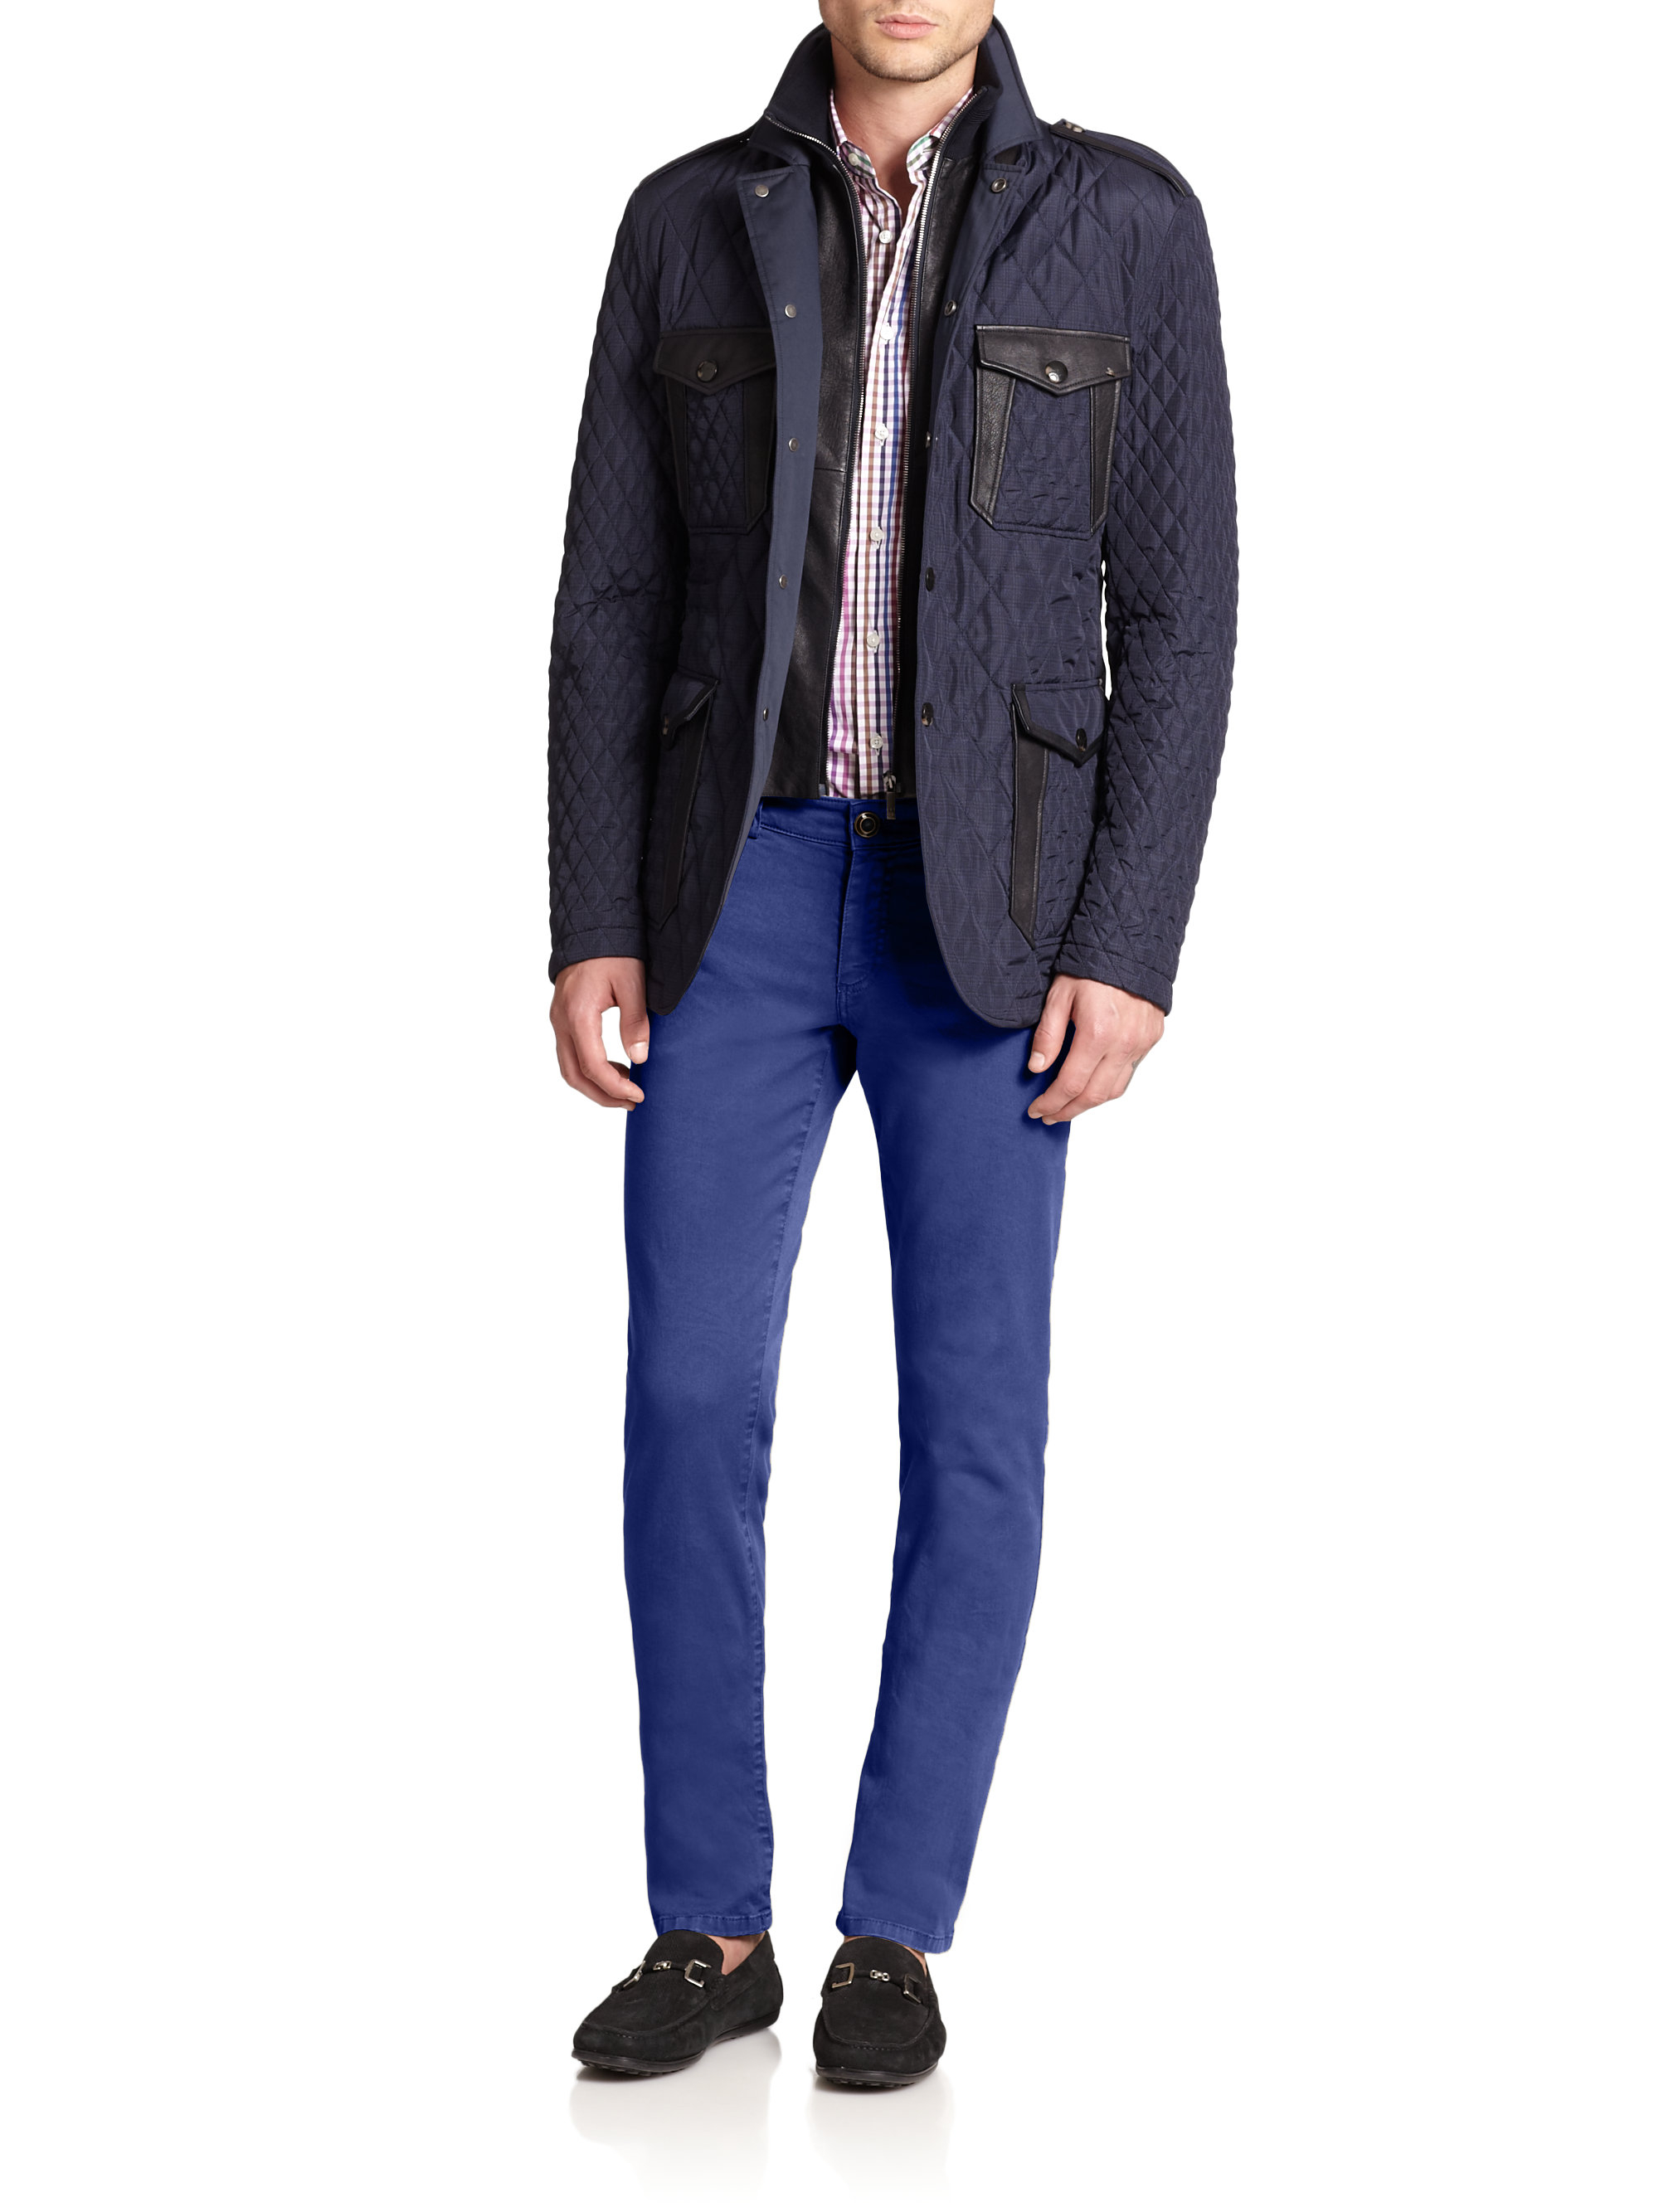 Lyst - Etro Quilted Safari Jacket in Blue for Men